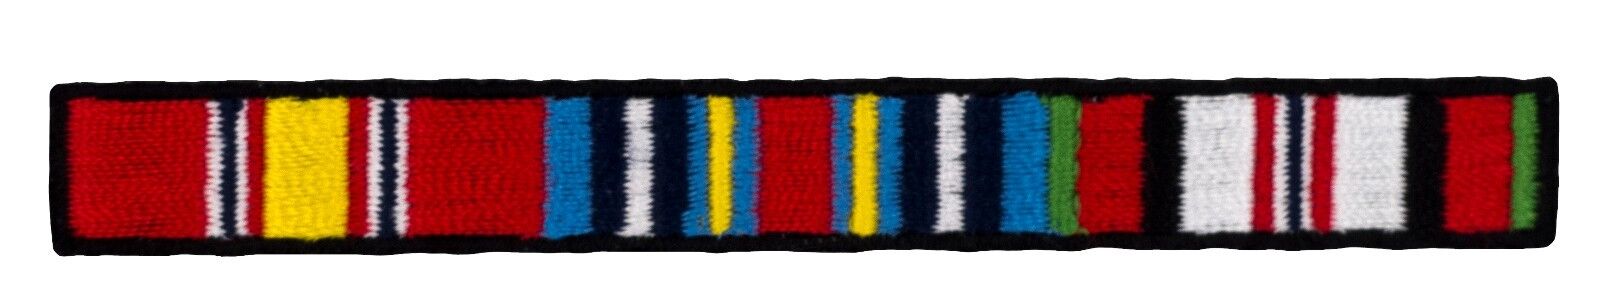 Afghanistan Campaign Ribbons Patch (463) 4 1/4" x 1/2" Embroidered Patch 54766